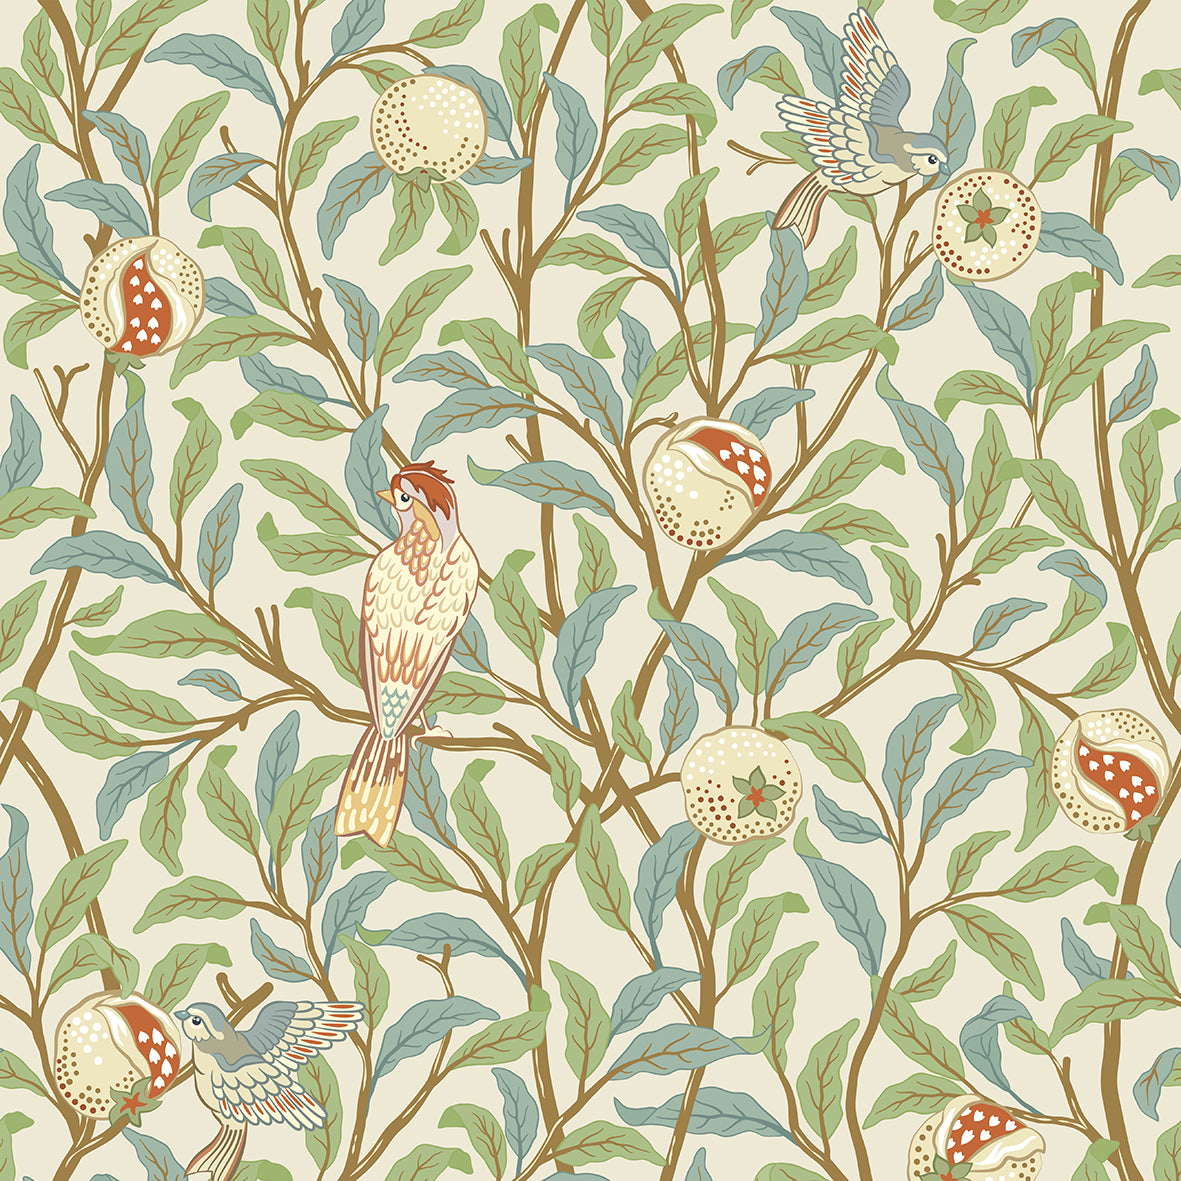 william-morris-co-woven-cotton-blanket-with-fringe-bird-and-pomegranate-collection-parchment-2